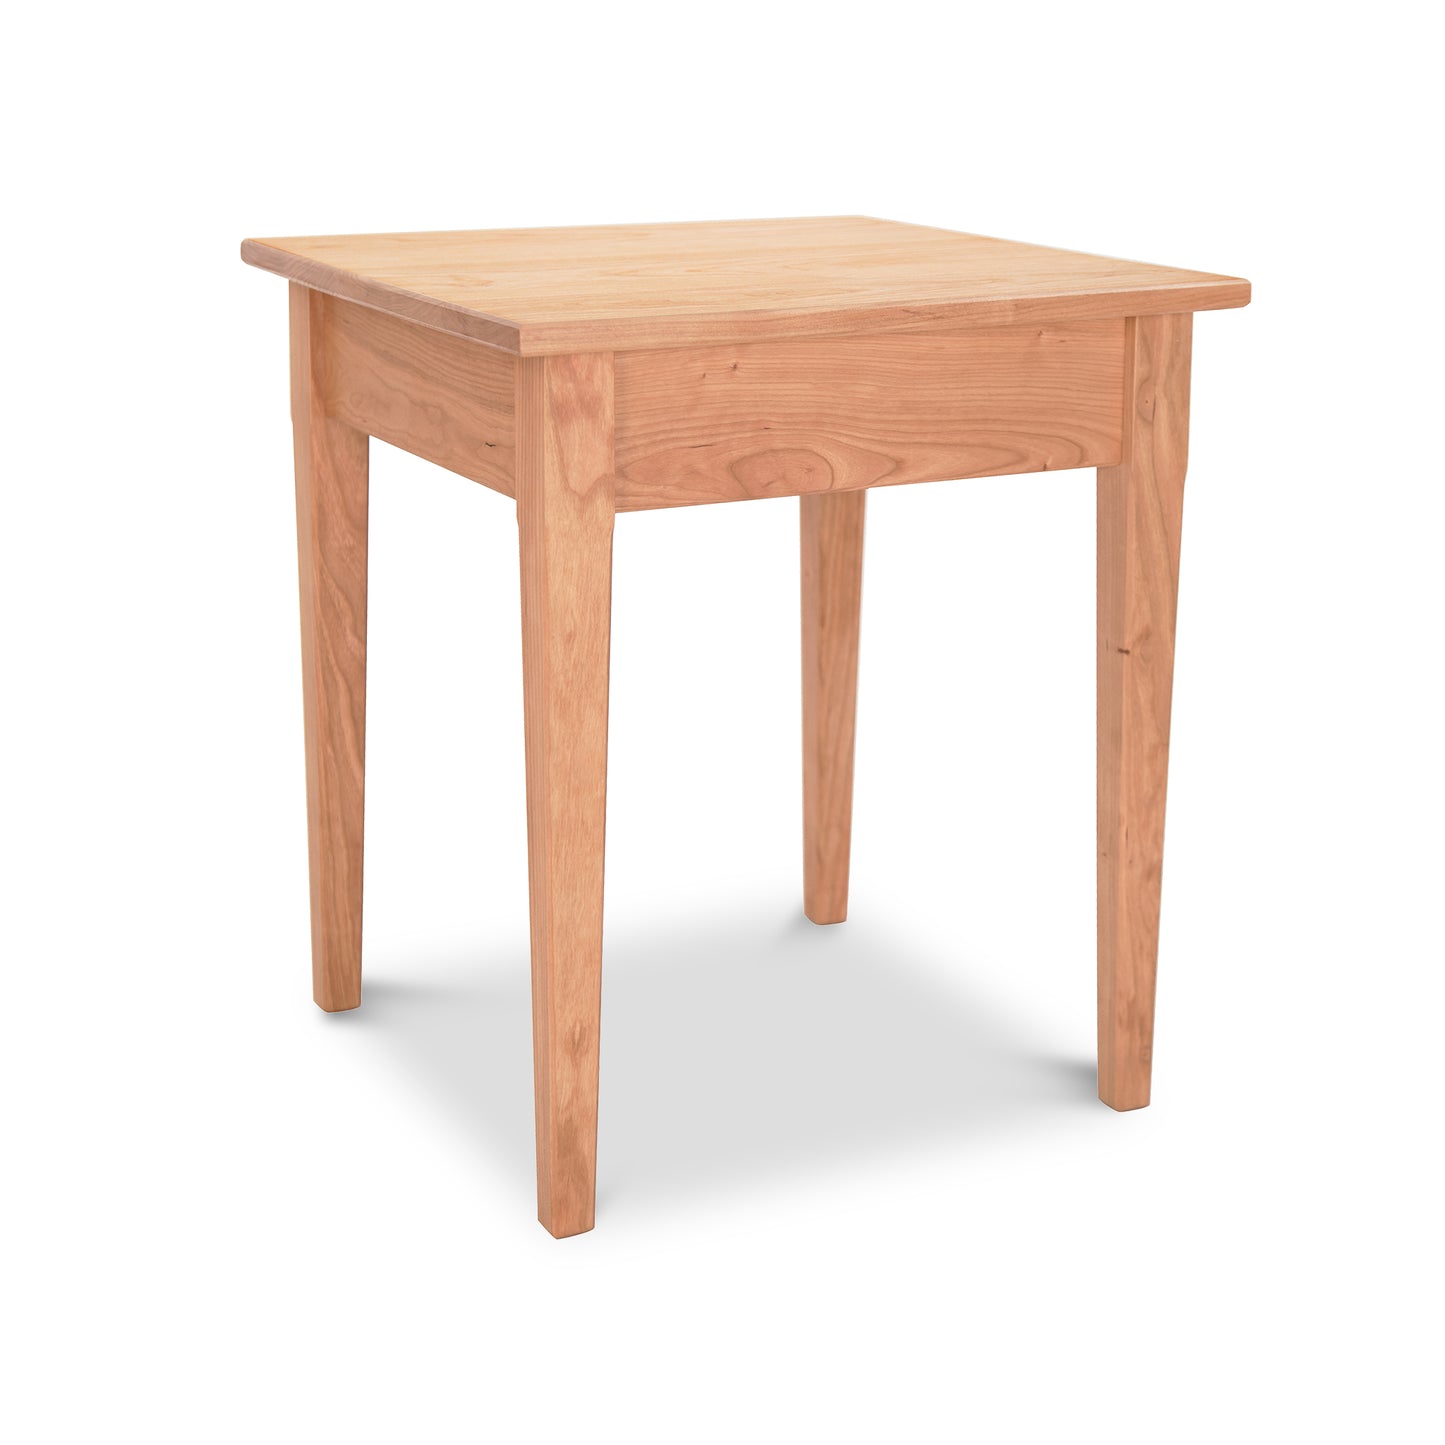 A Vermont Shaker End Table by Maple Corner Woodworks, with a square top and four legs, isolated on a white background. The table appears sturdy and is made of light-colored wood from sustainably harvested hardwoods.